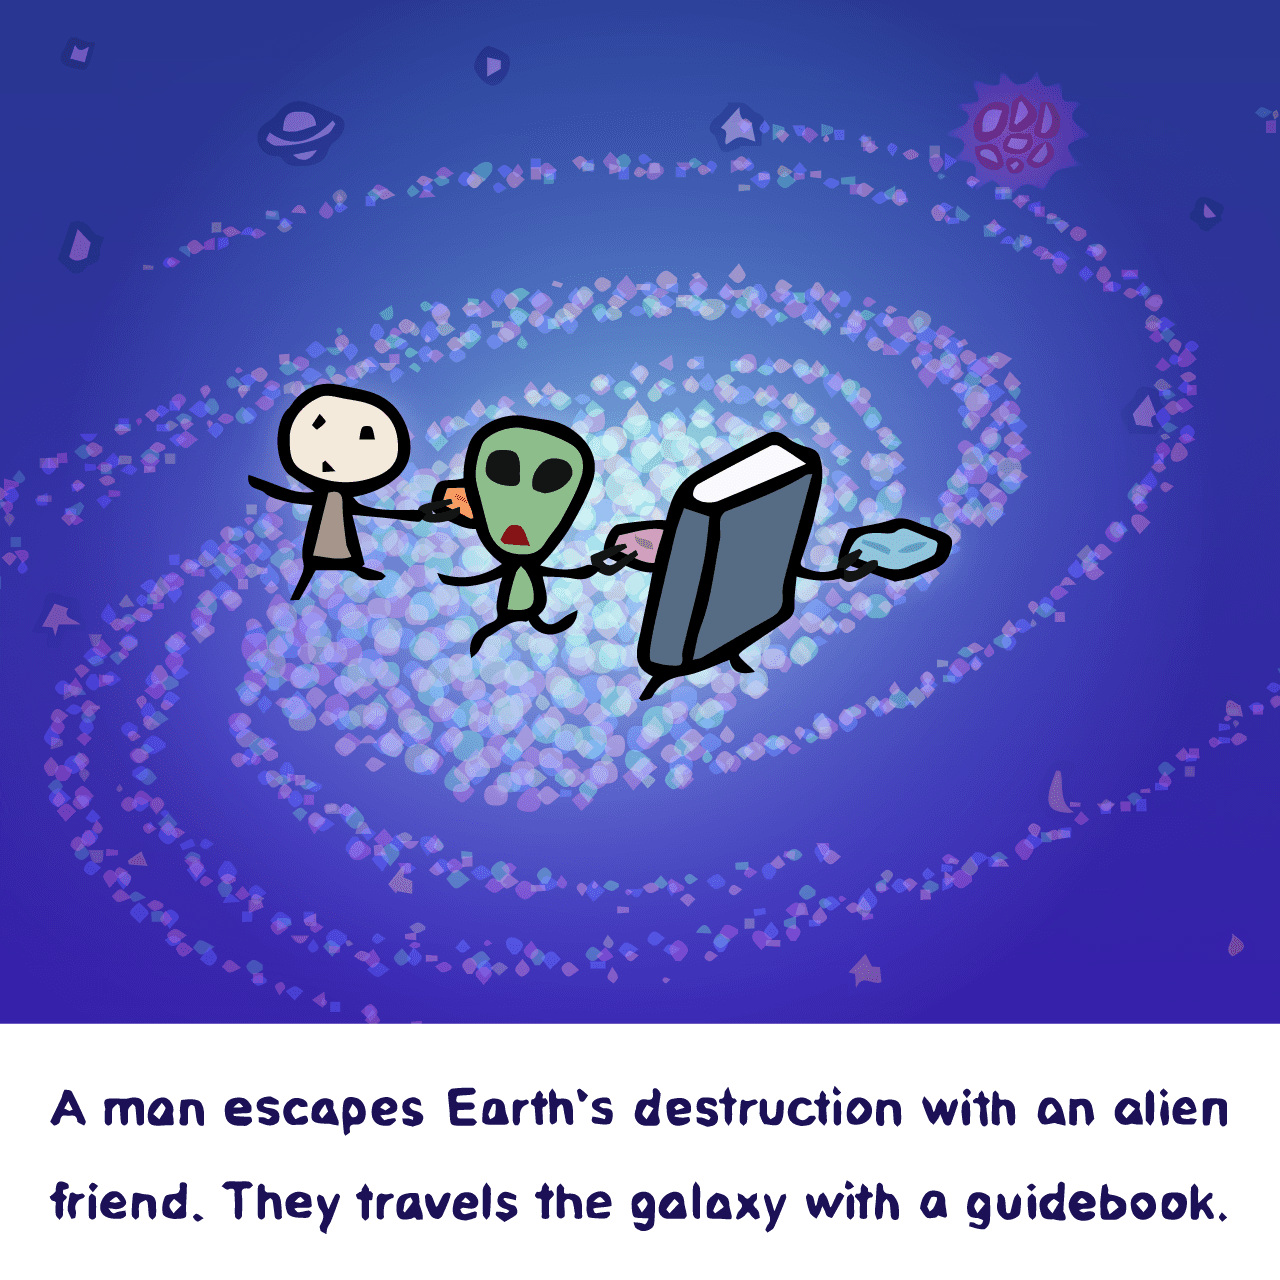 Douglas Adams "The Hitchhiker's Guide to the Galaxy : A man escapes Earth’s destruction with an alien friend. They travels the galaxy with a guidebook."